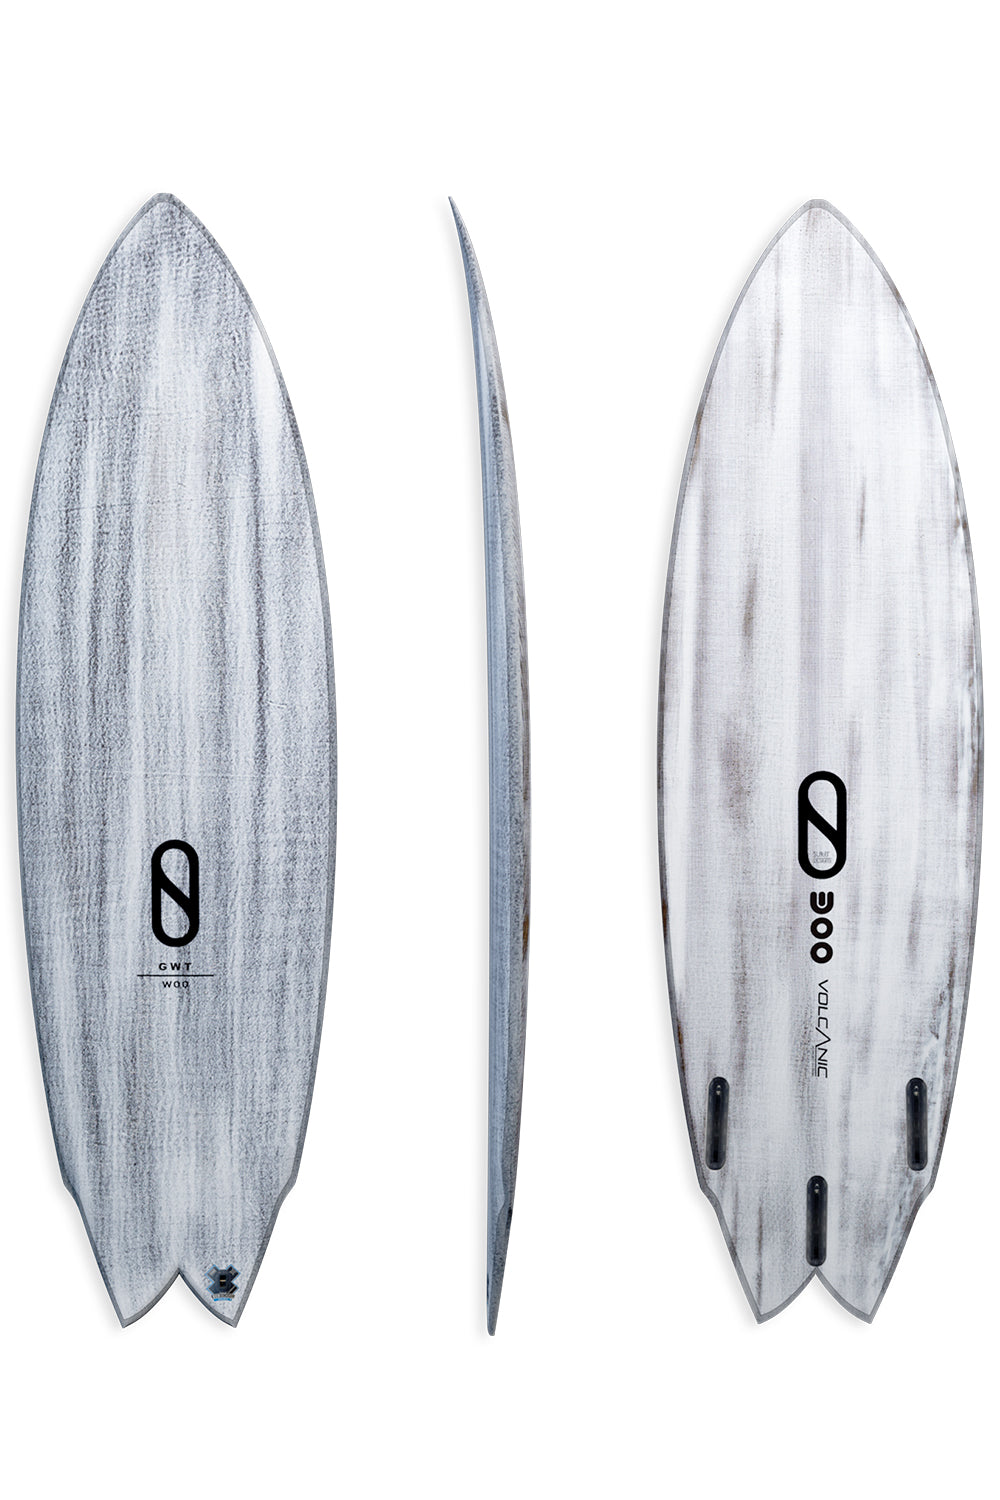 Where can I customize and repair my surfboard while I'm in Bali